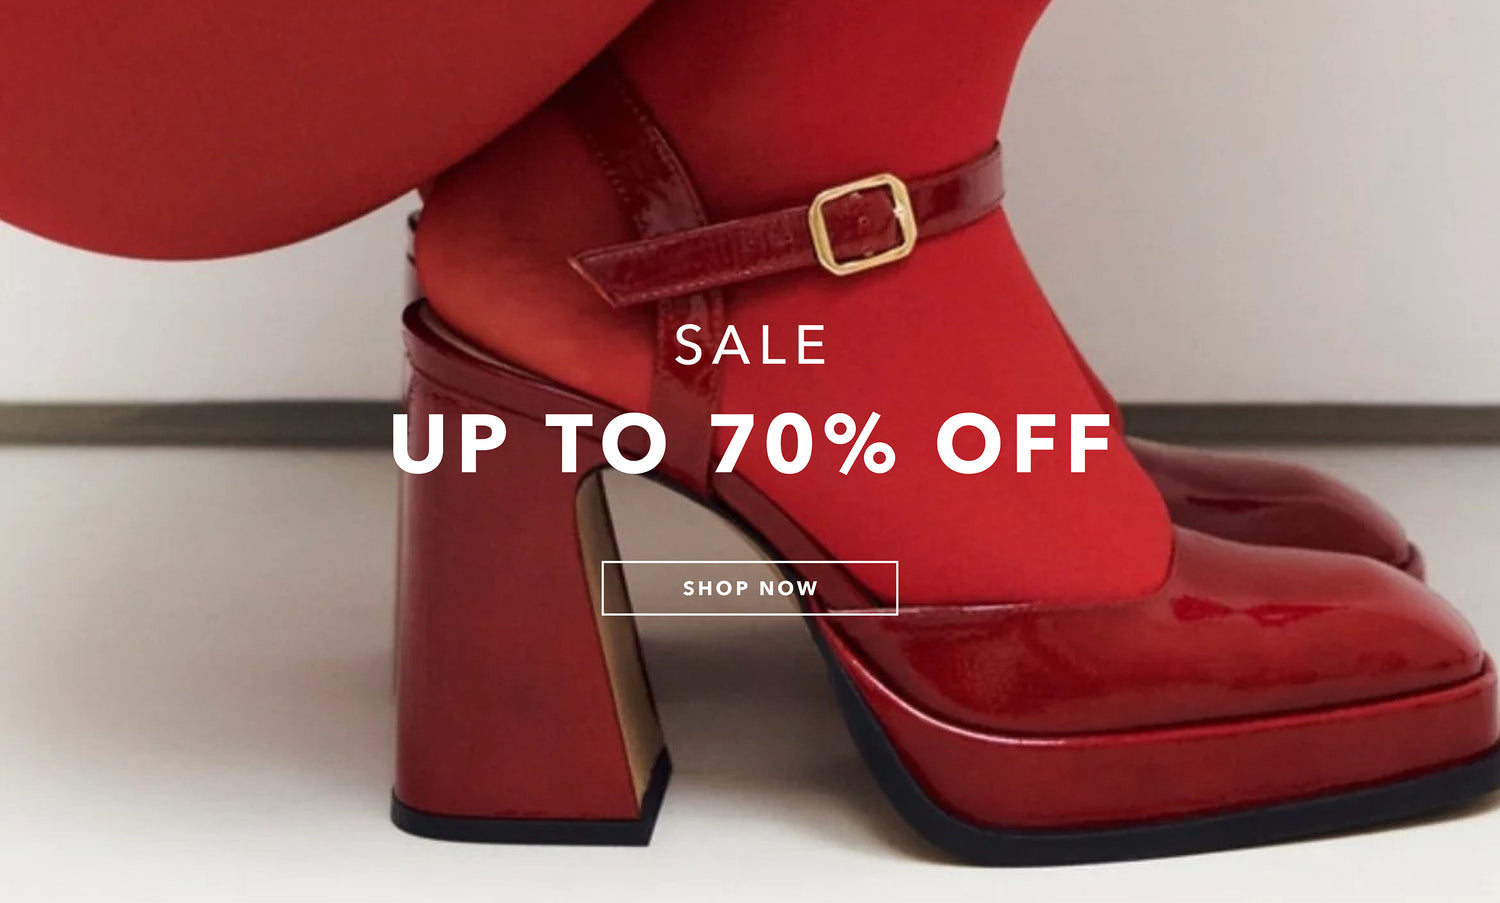 Up to 70% OFF